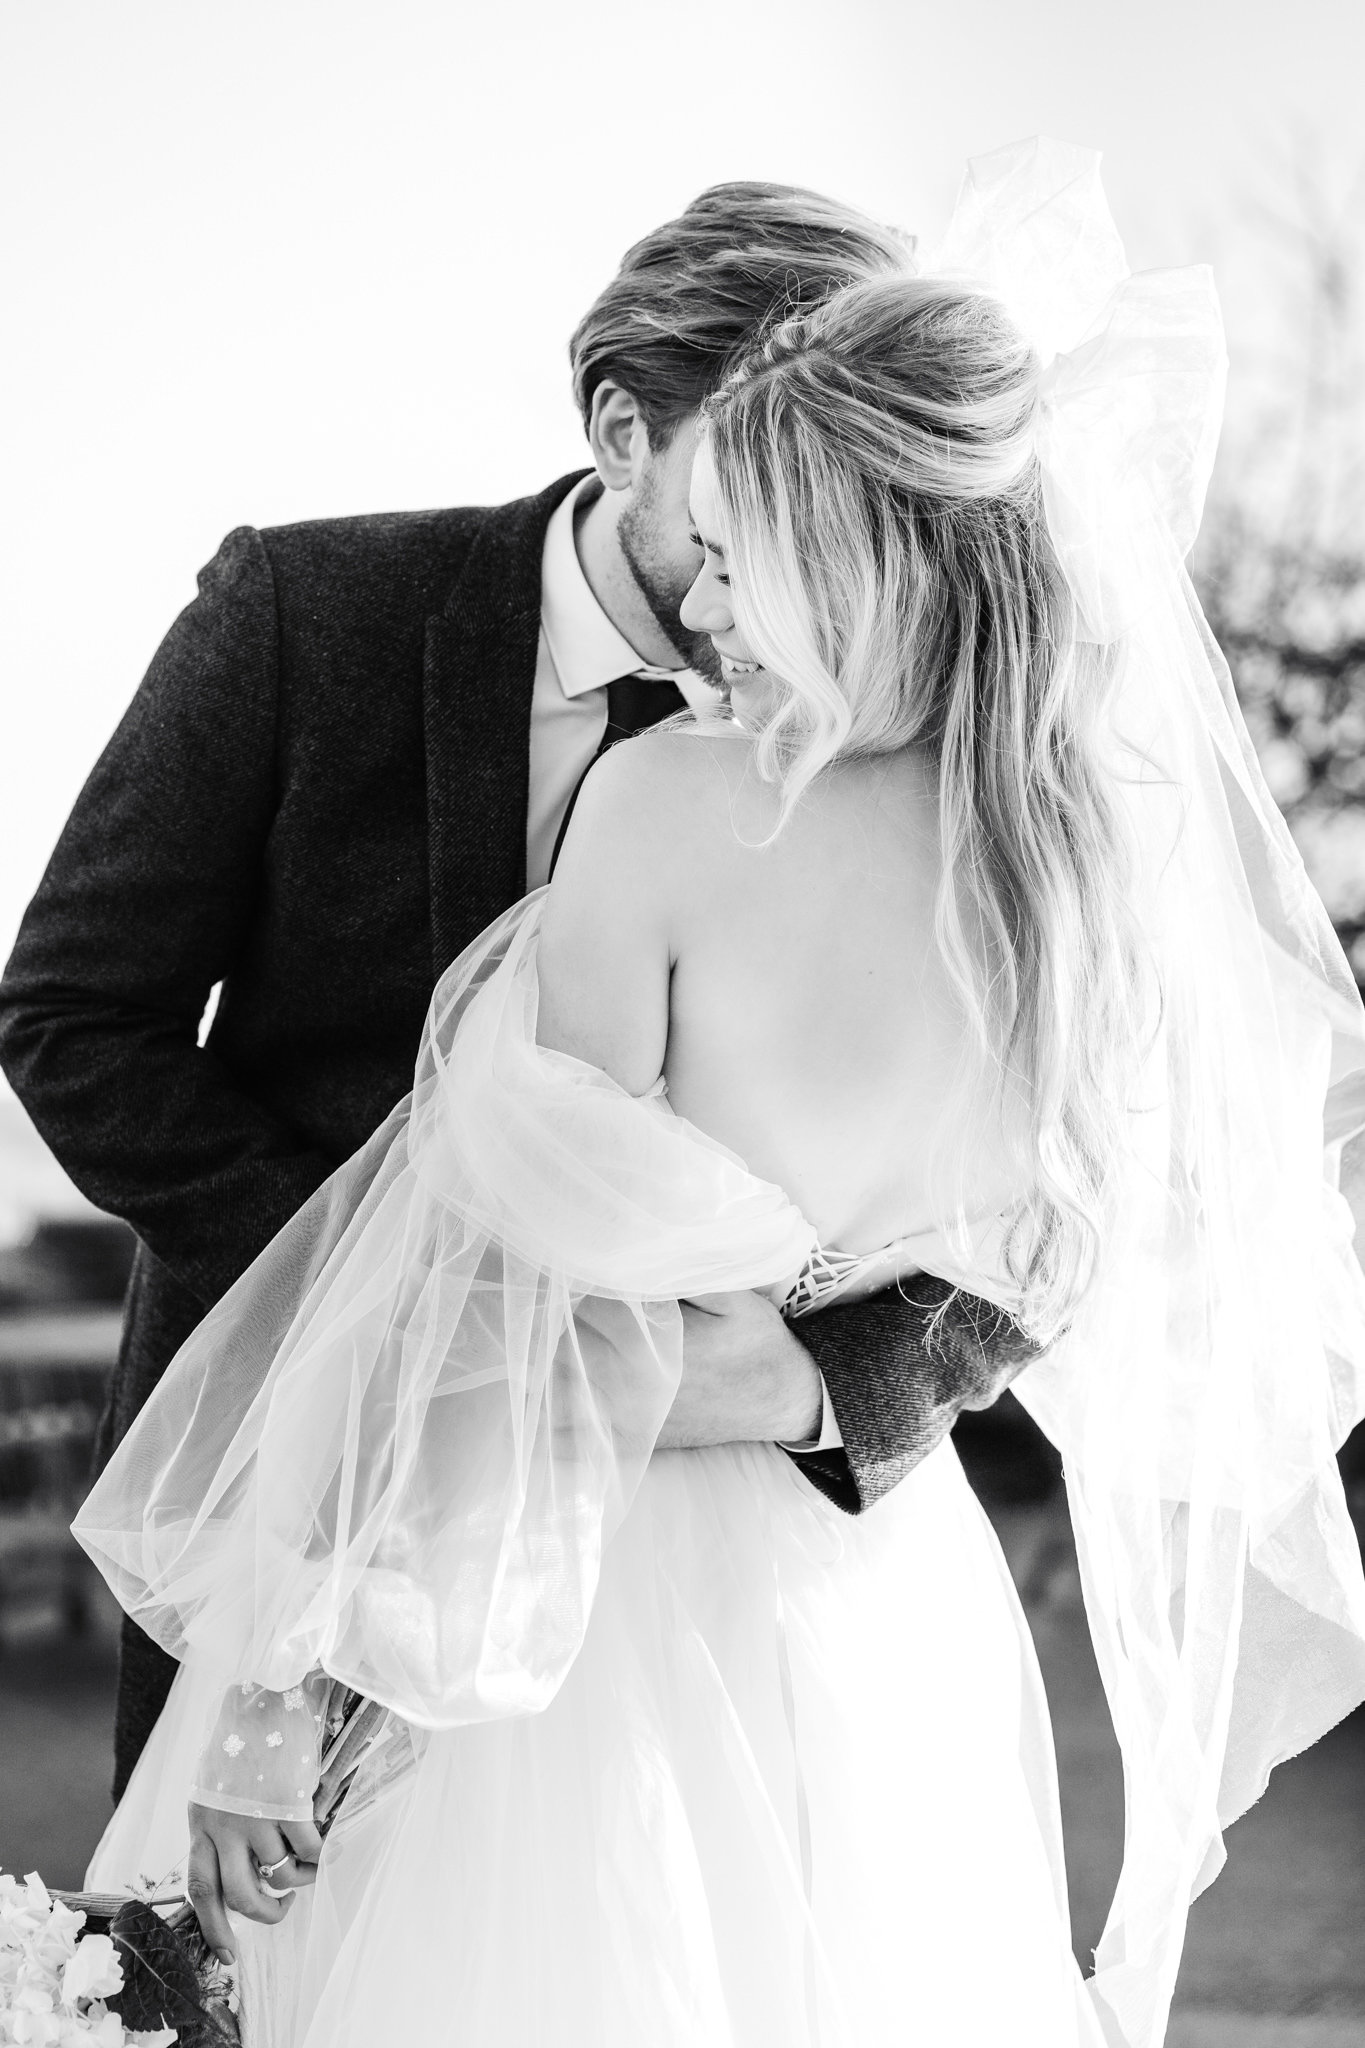 wedding photographer chloe caldwell captures this candid moment between a bride and groom